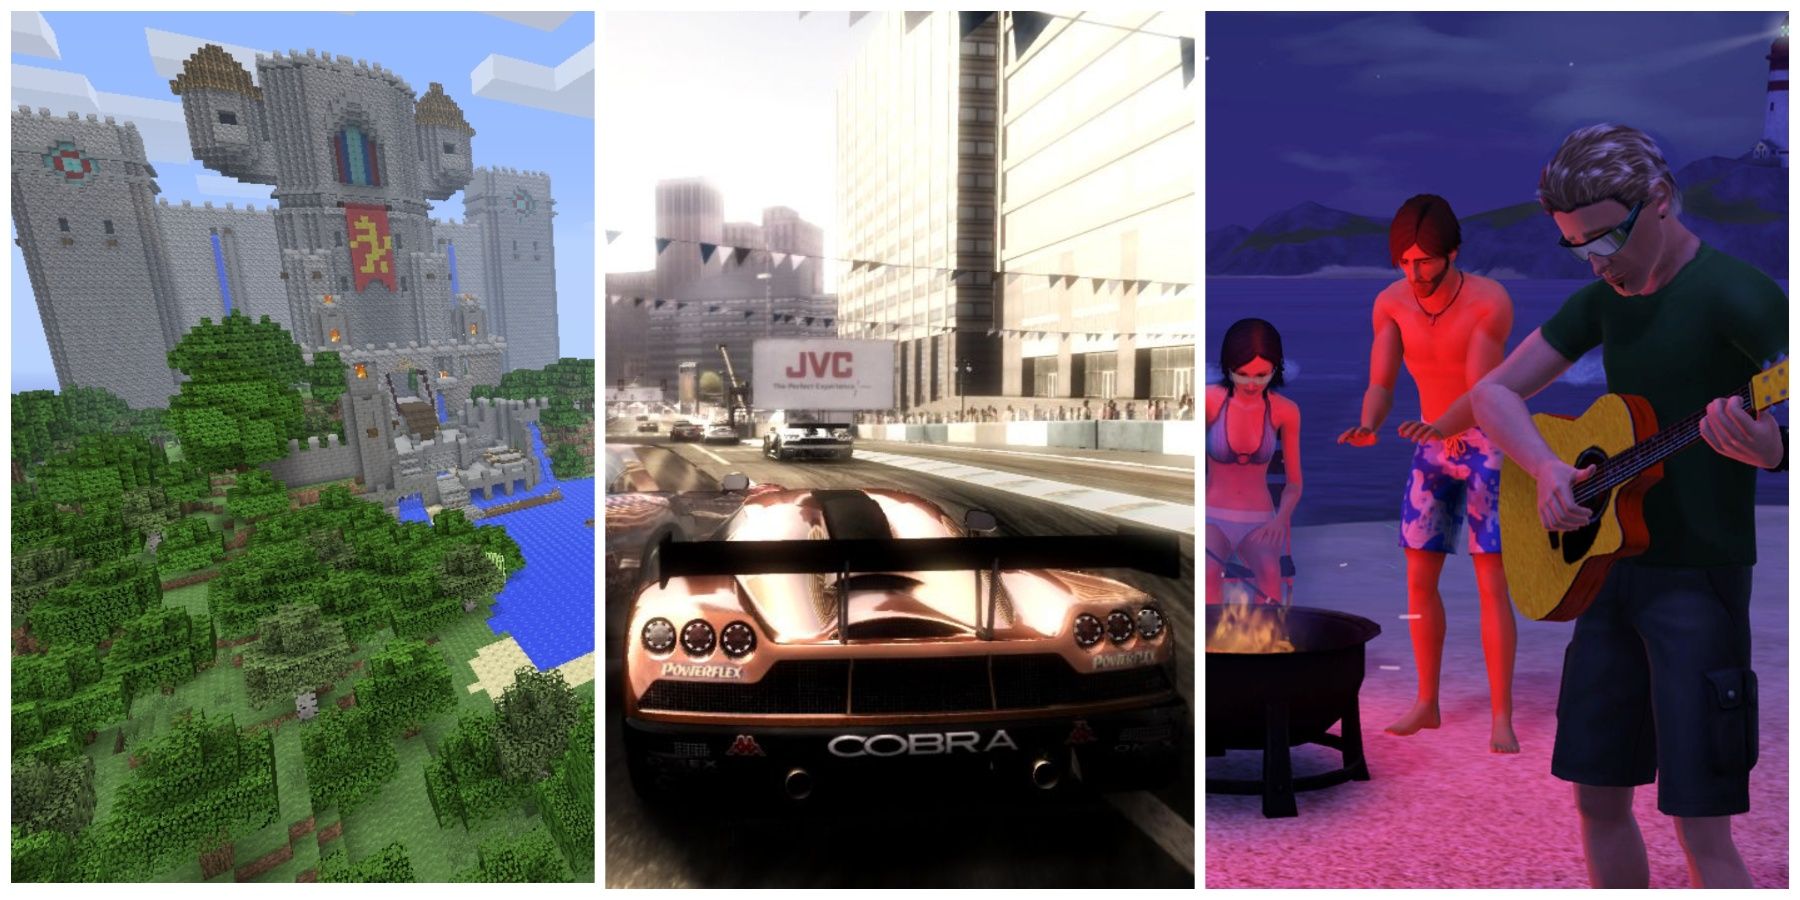 Featured image of PlayStation 3 simulation games like Minecraft, Grid, and The Sims 3